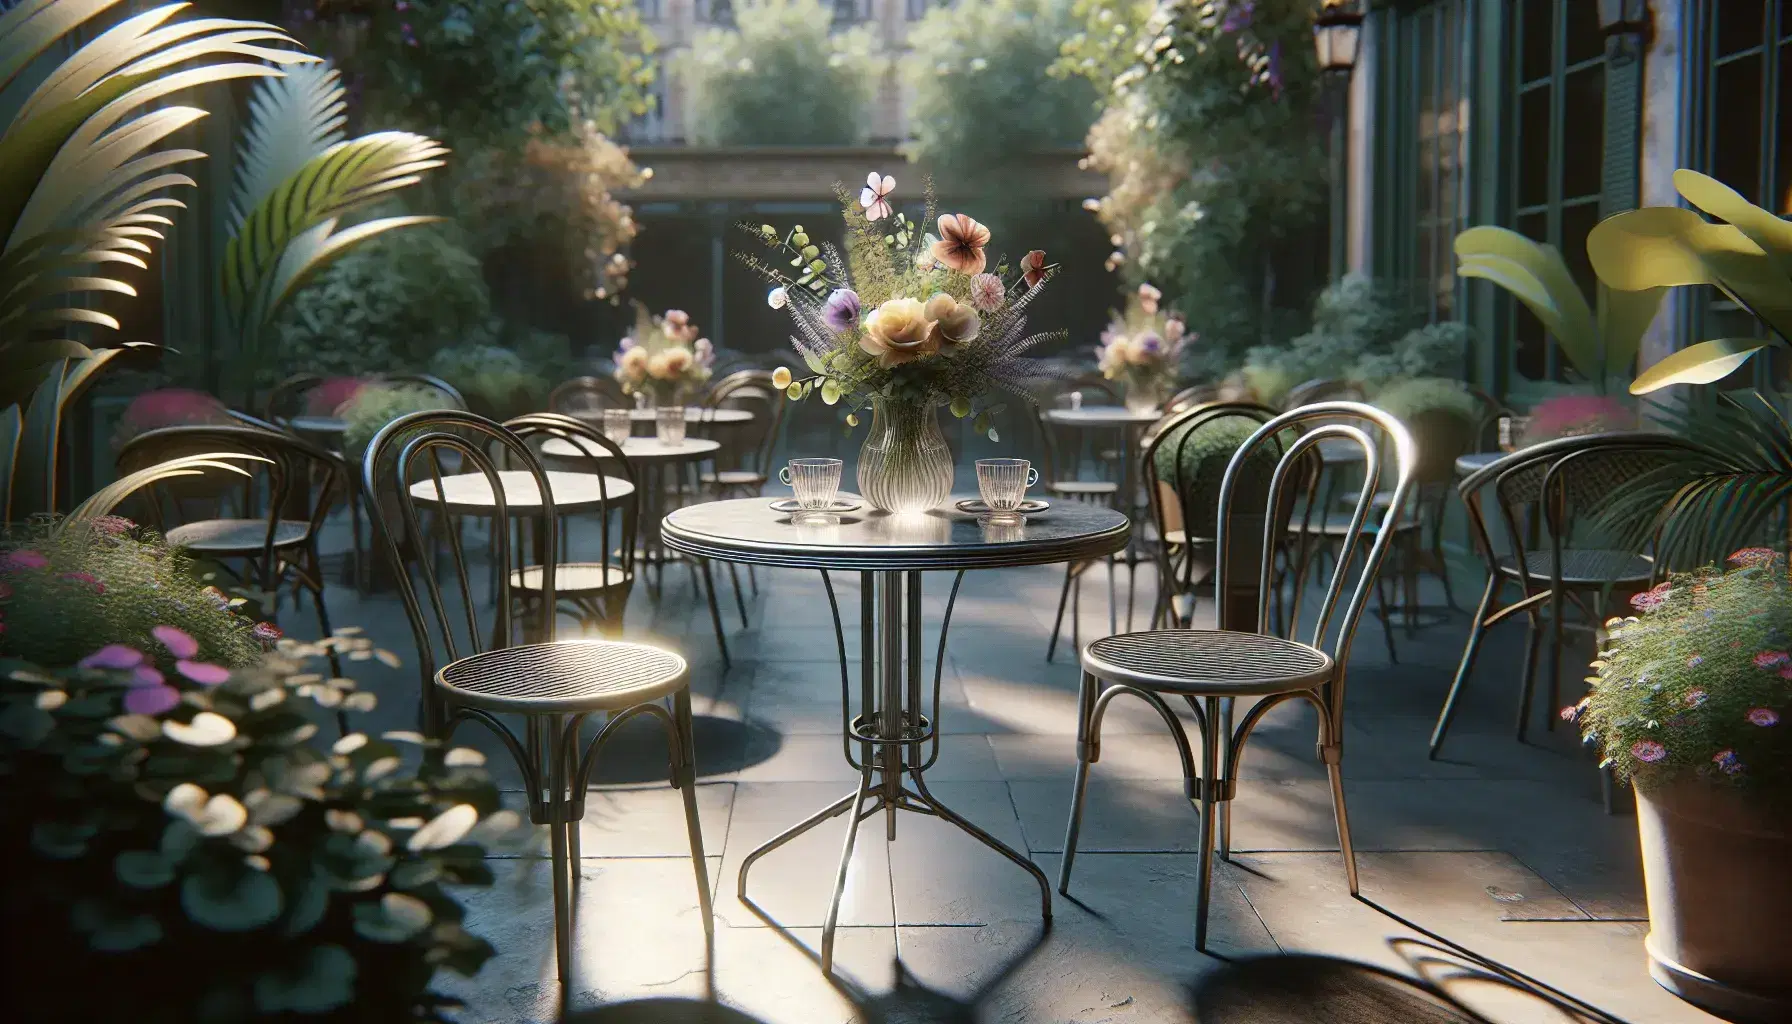 Serene French café scene with a marble-topped bistro table, traditional chairs, empty glass cups, and a vibrant bouquet, surrounded by lush potted plants.